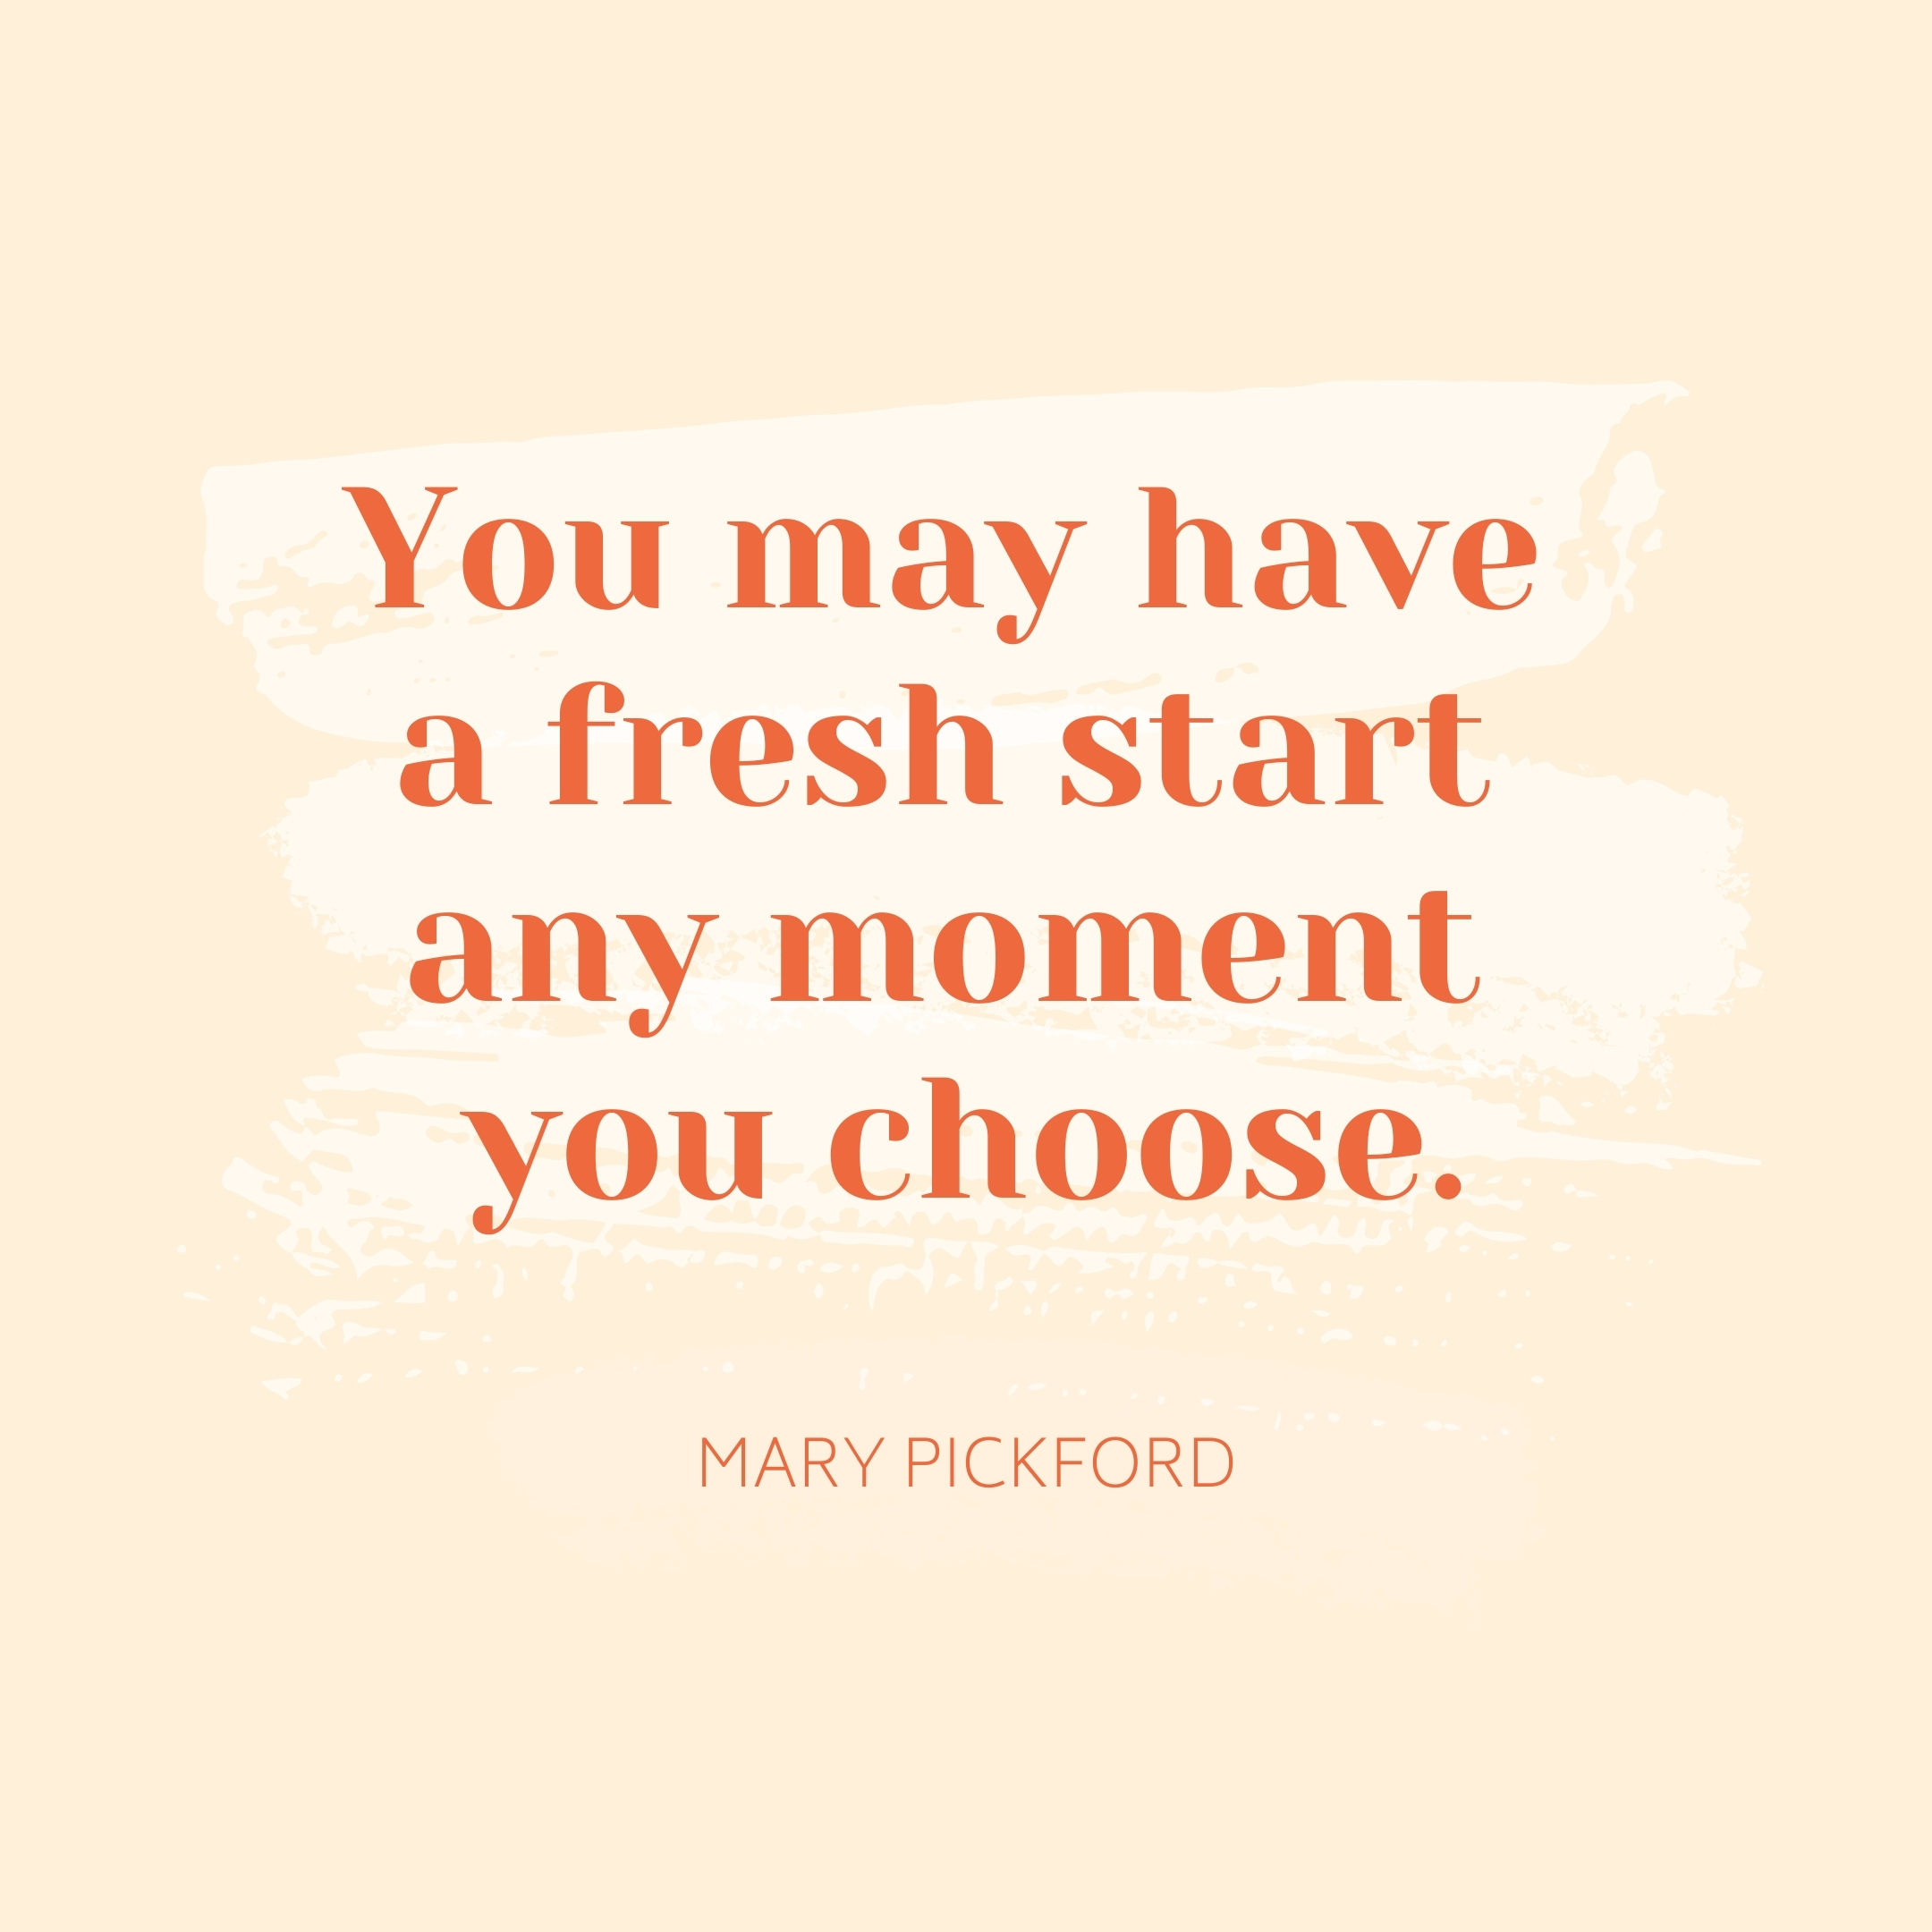 Mary Pickford | Monday Motivation Quotes